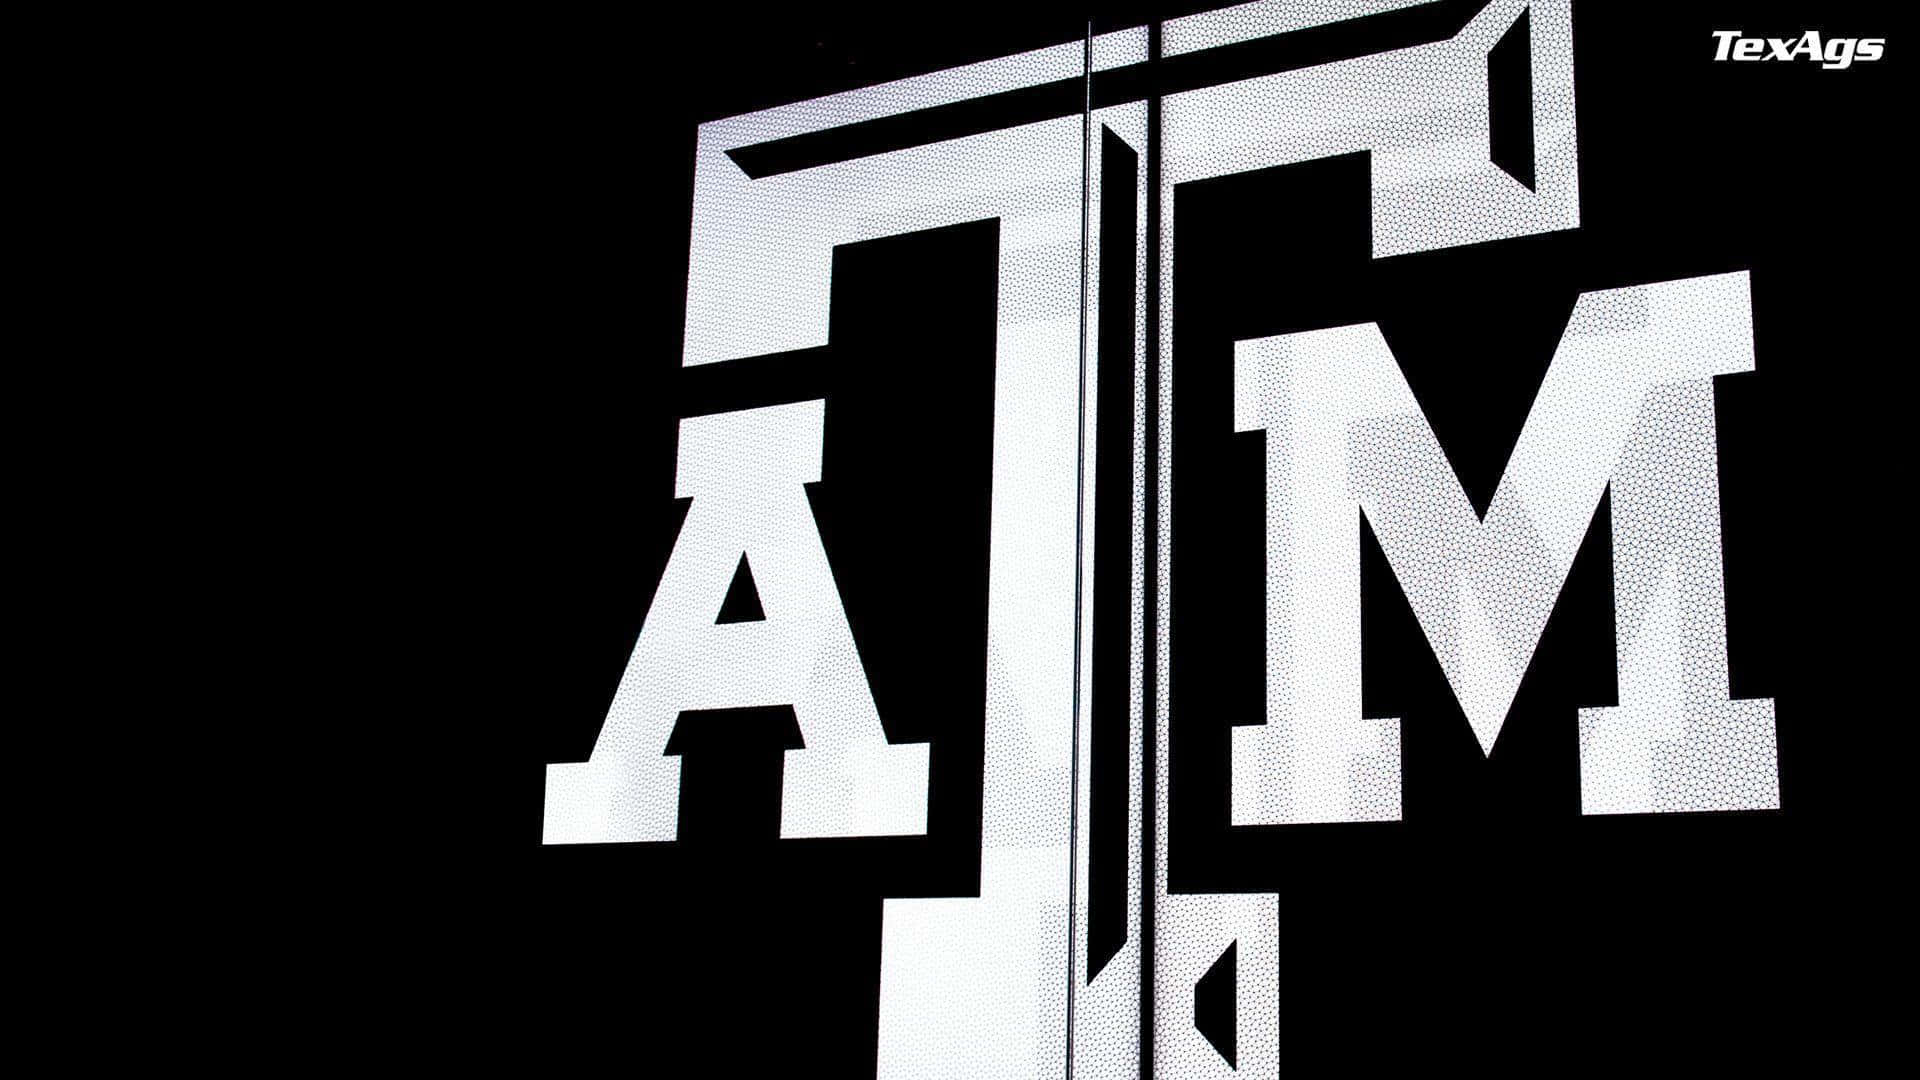 Black And White Image Of The Texas Am Logo Wallpaper